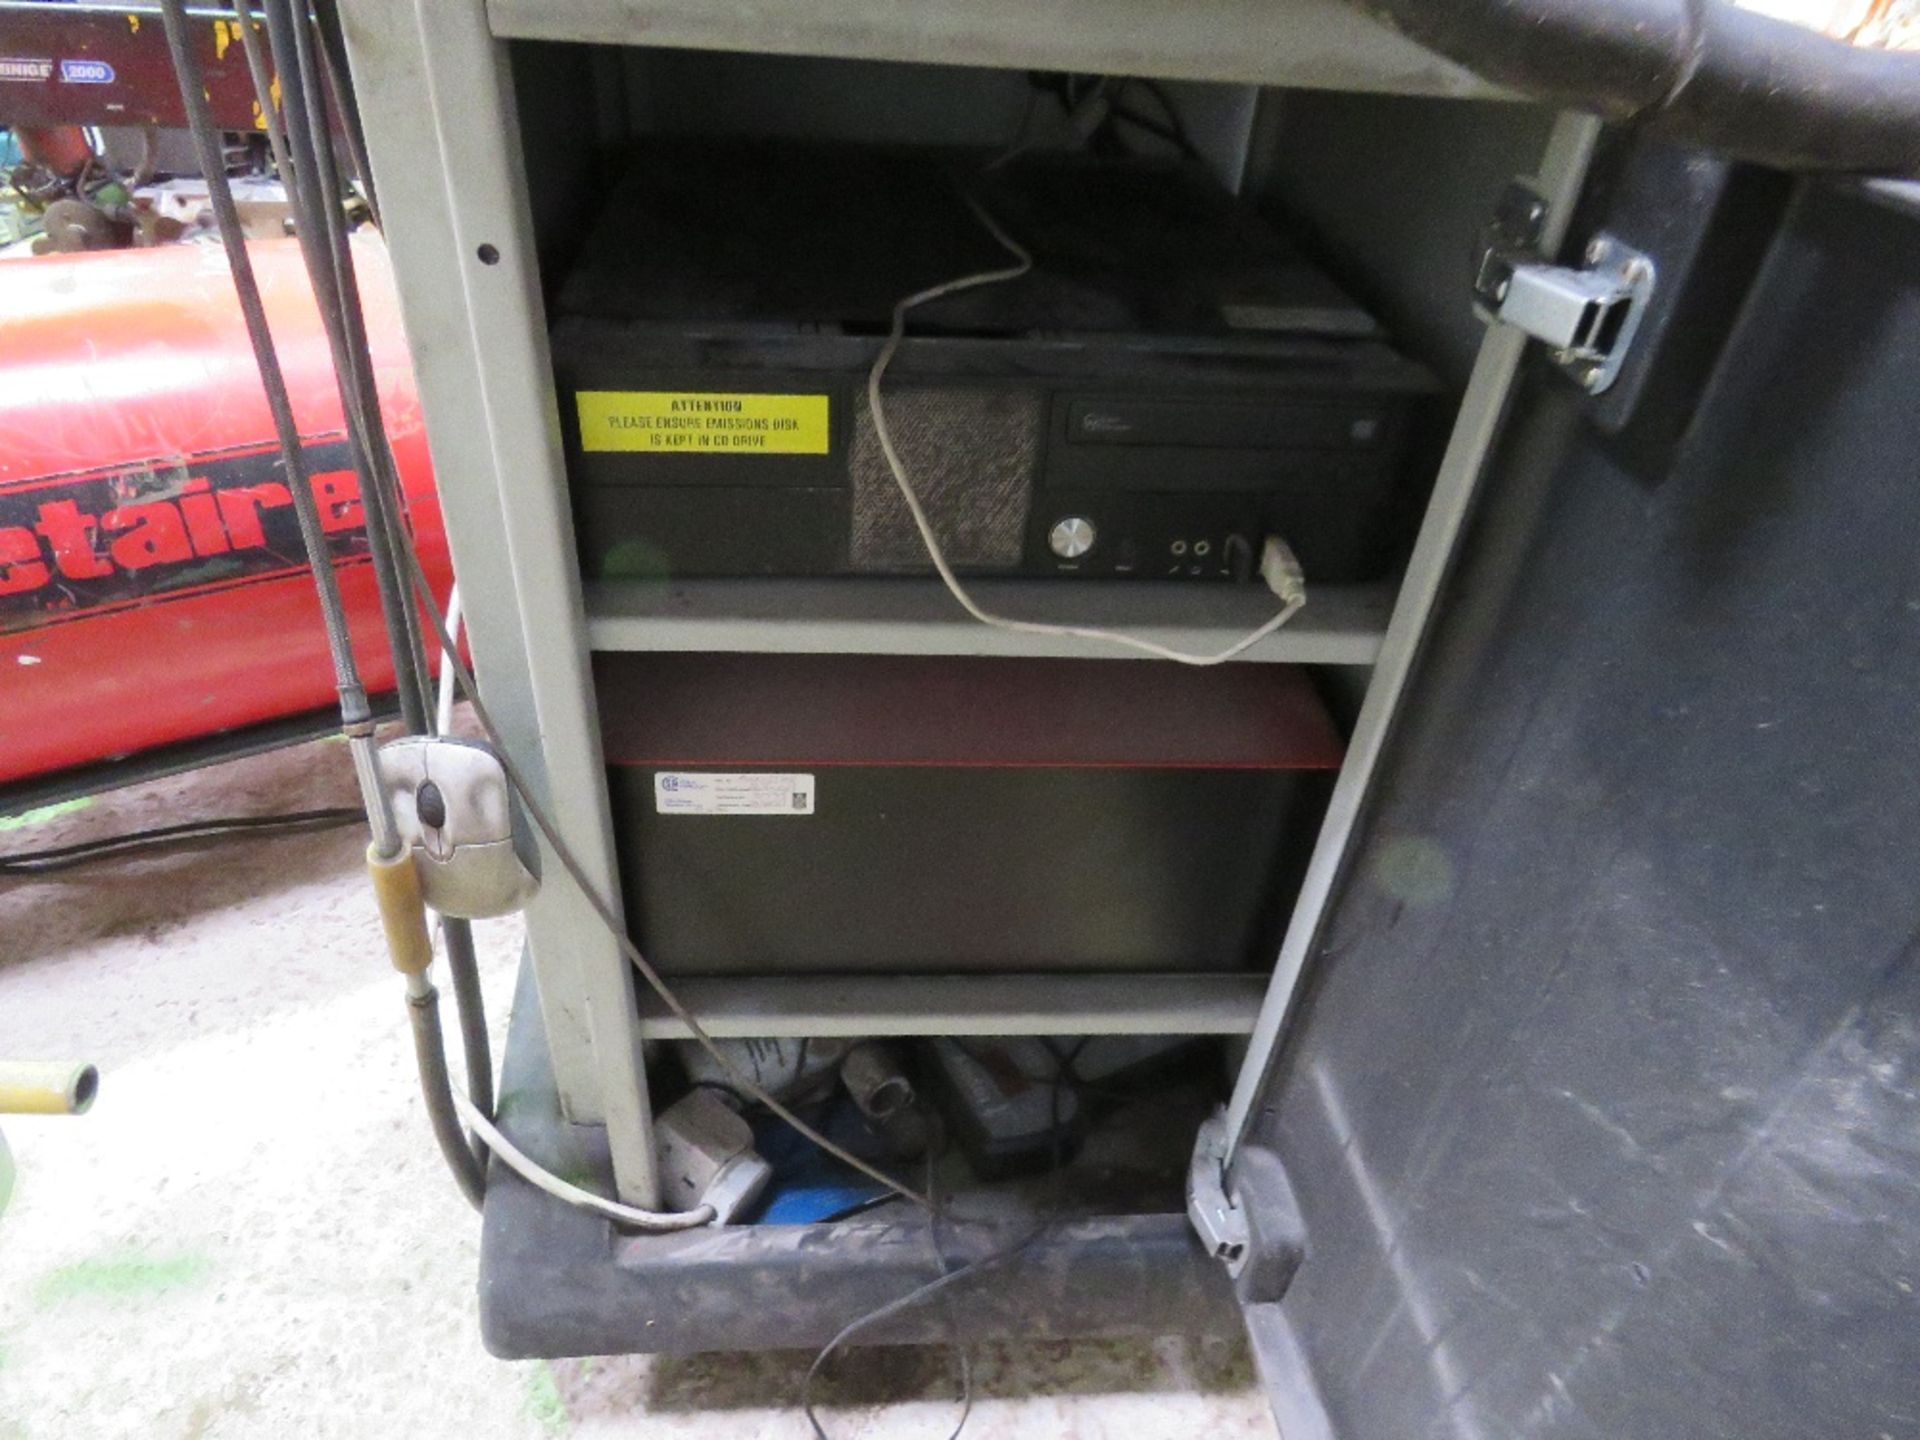 OLIVER 9500 SERIES VEHICLE EMMISSION TESTER. SOURCED FROM GARAGE COMPANY LIQUIDATION. - Image 3 of 10